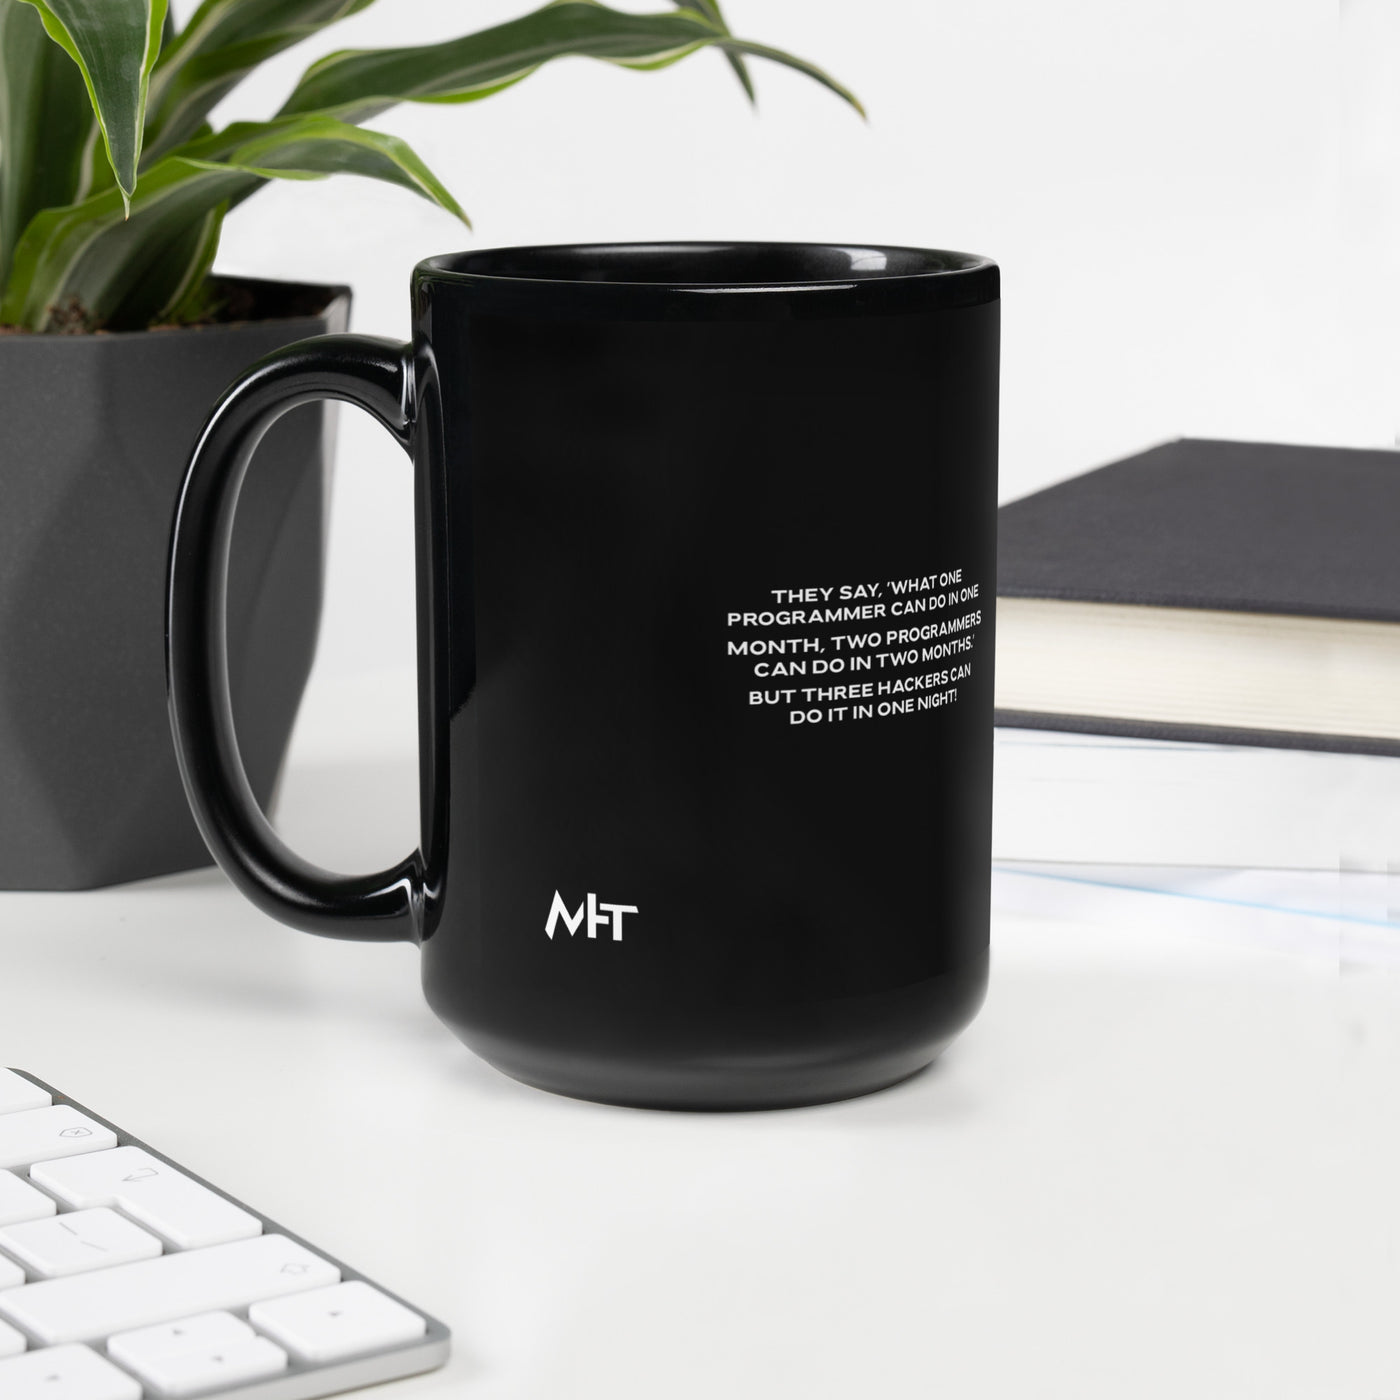 They say, what one programmer can do in one month V2 - Black Glossy Mug